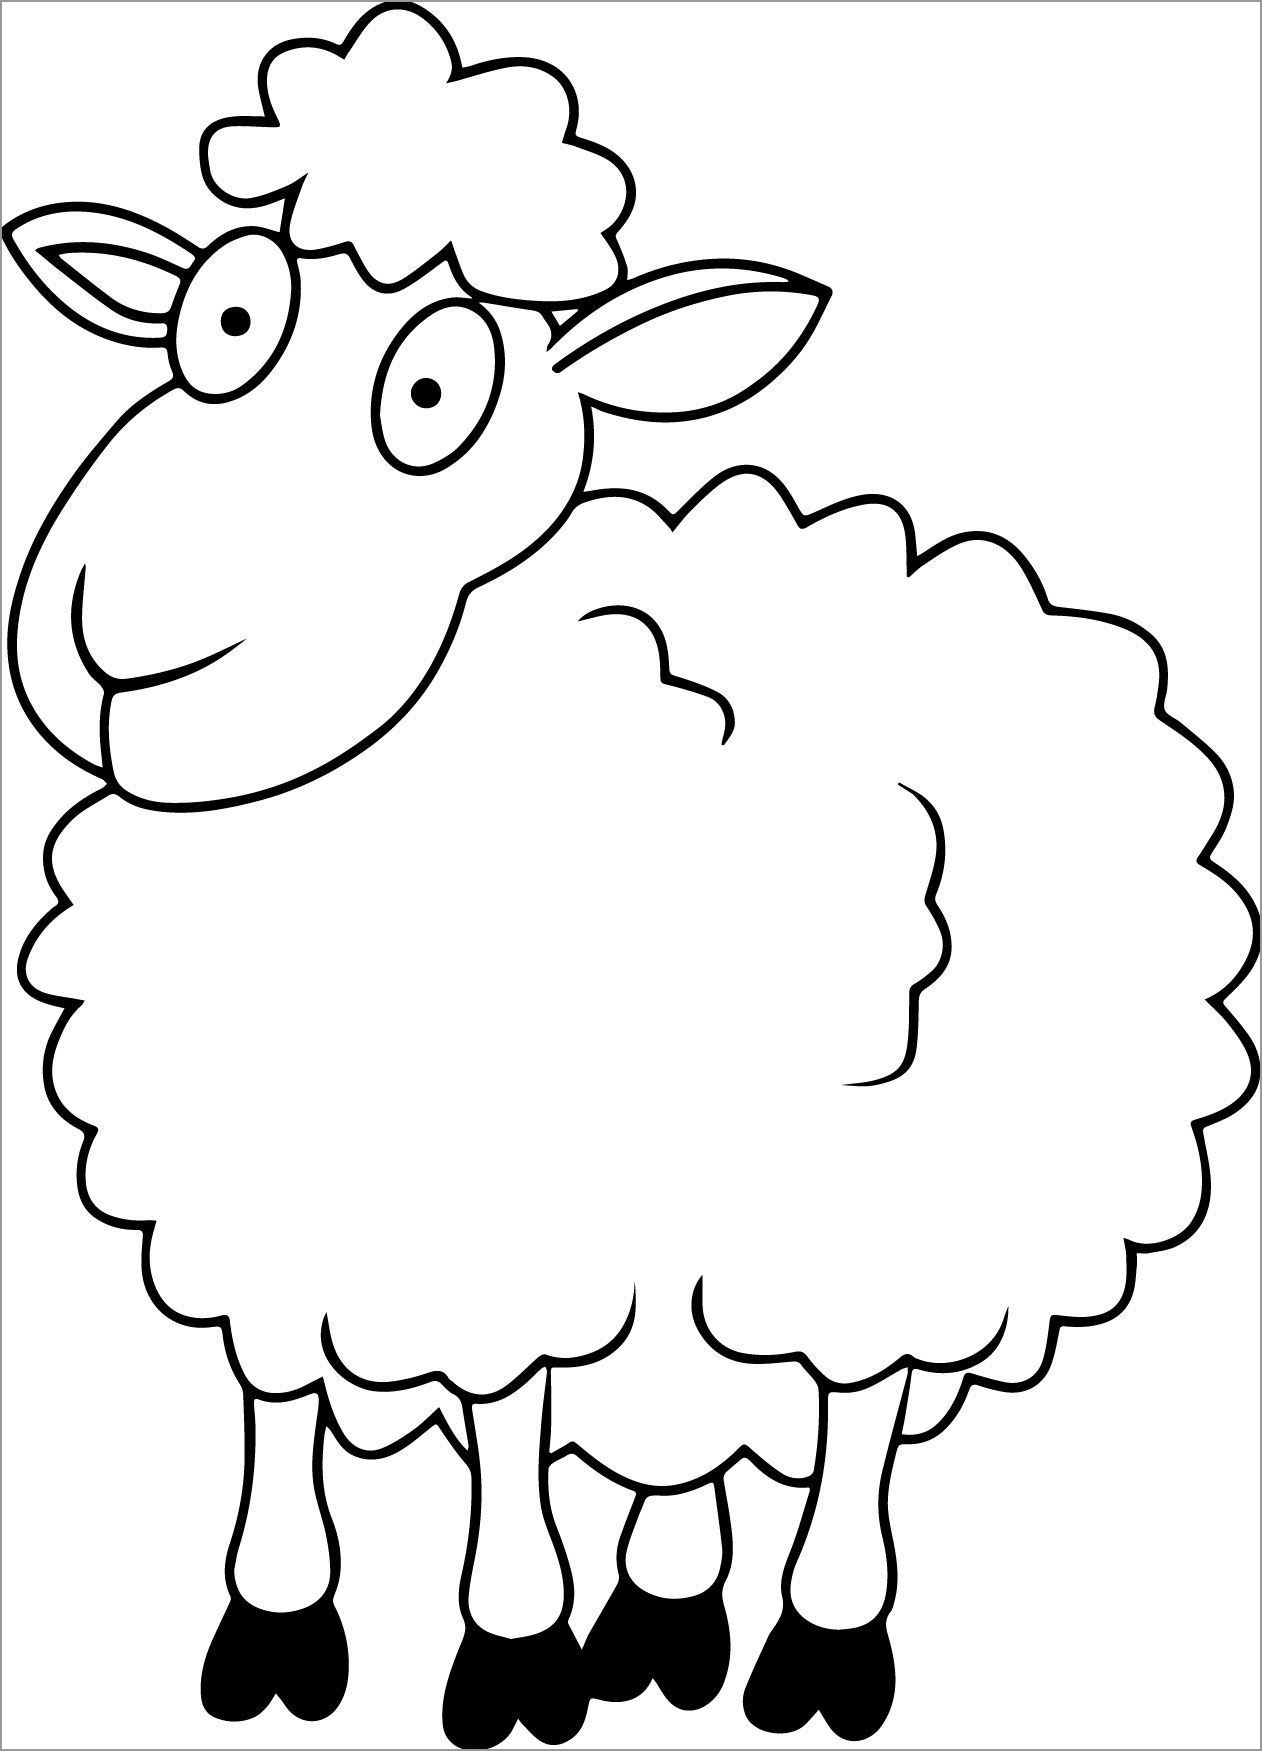 Funny Sheep Coloring Page for Kids   ColoringBay